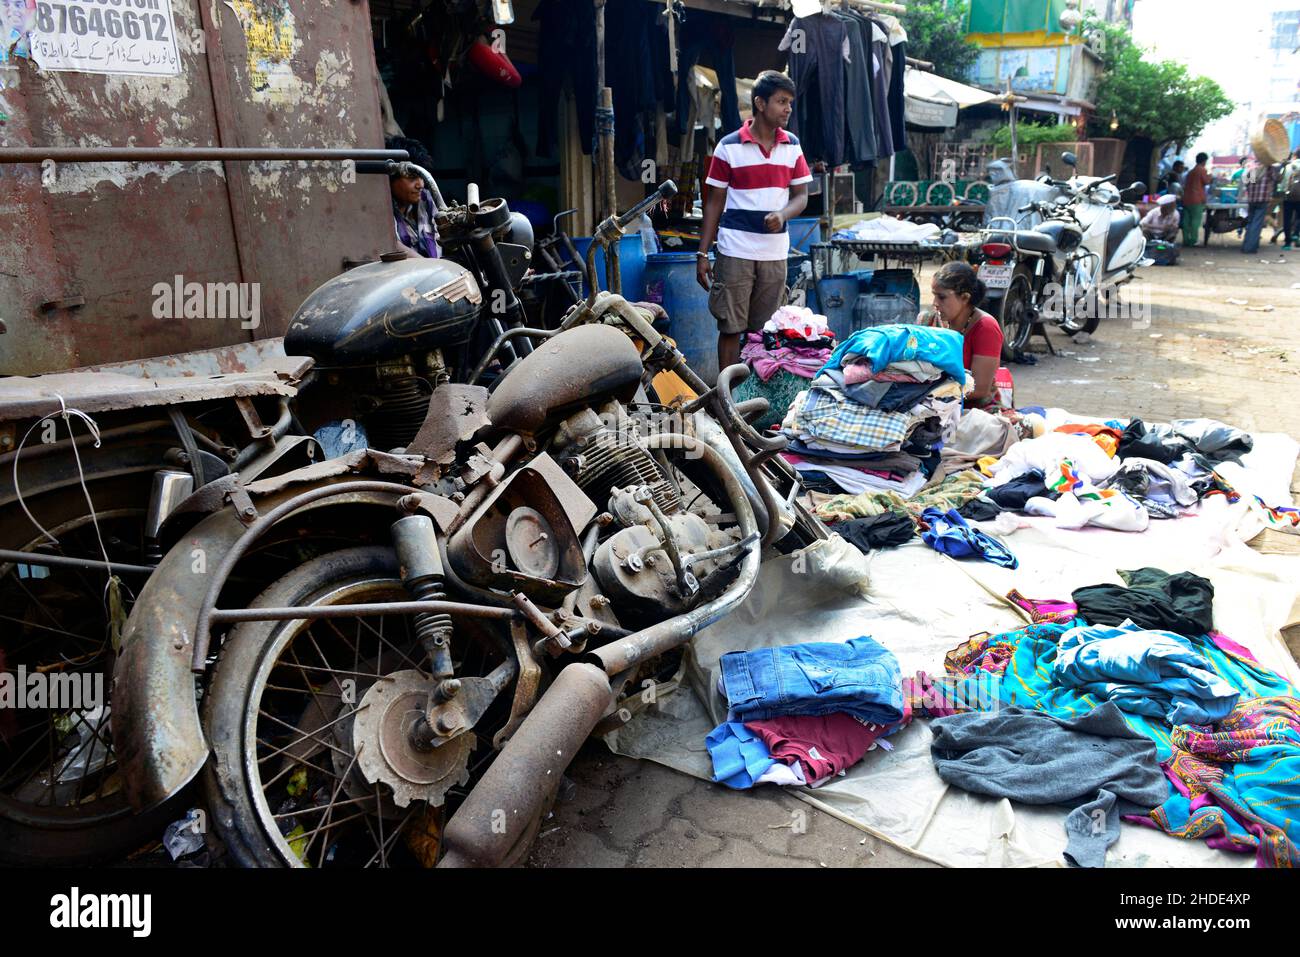 An old motorbike in a busy market near Dhobi ghat in Mumbai, India. Stock Photo